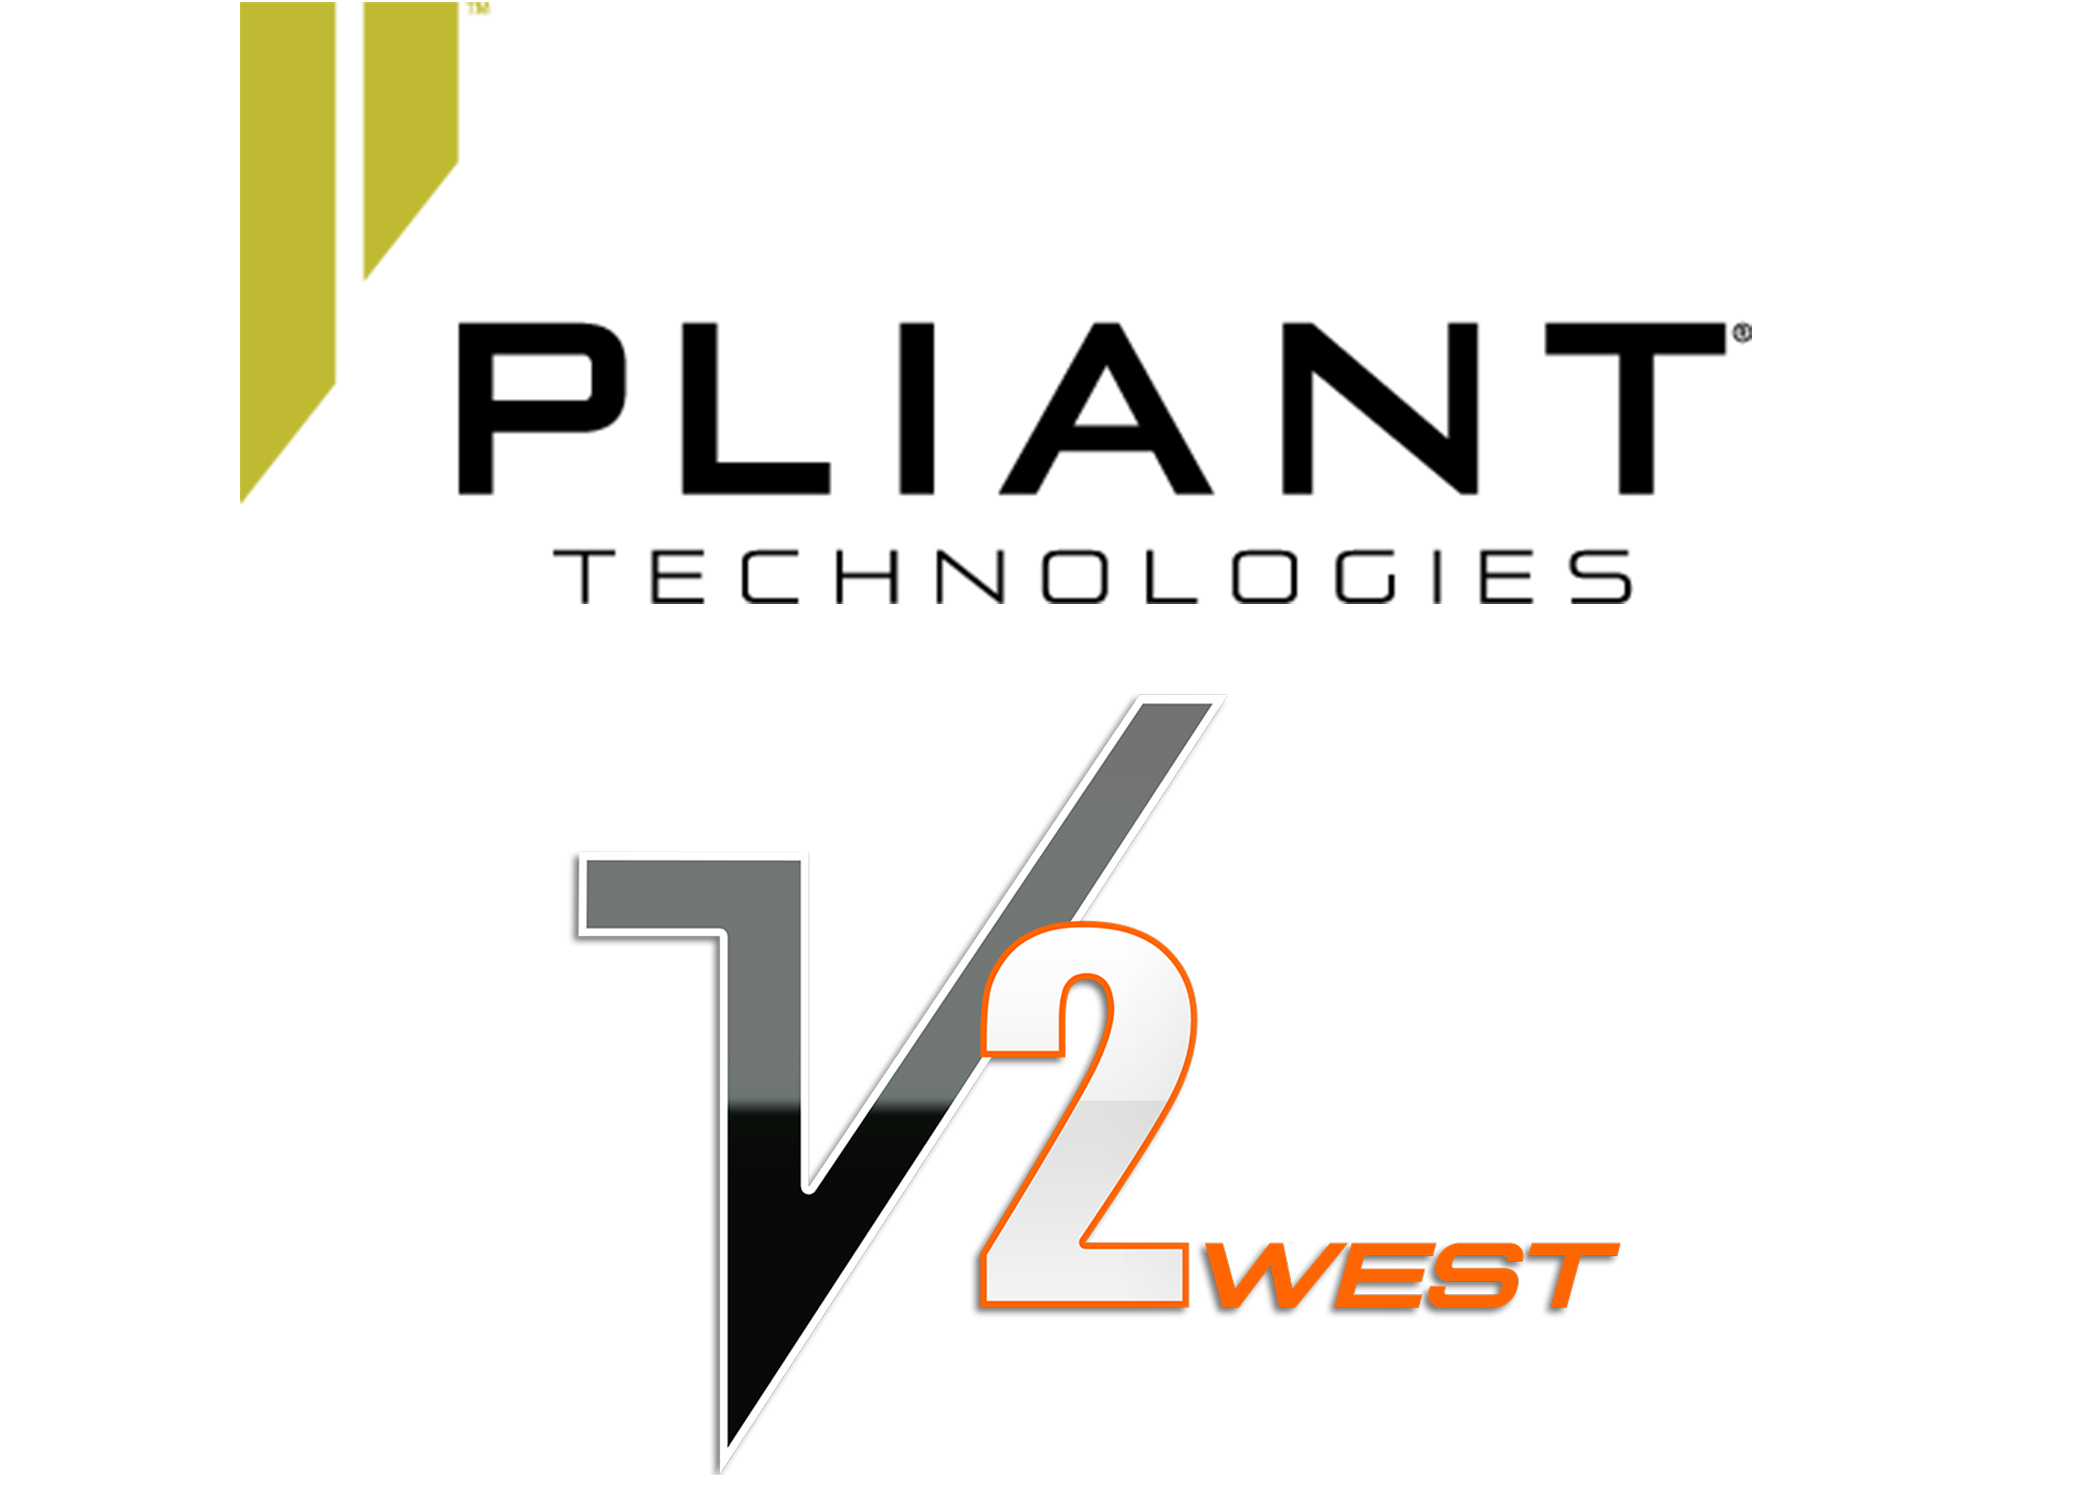 Pliant Technologies and Vision2 West Marketing logos